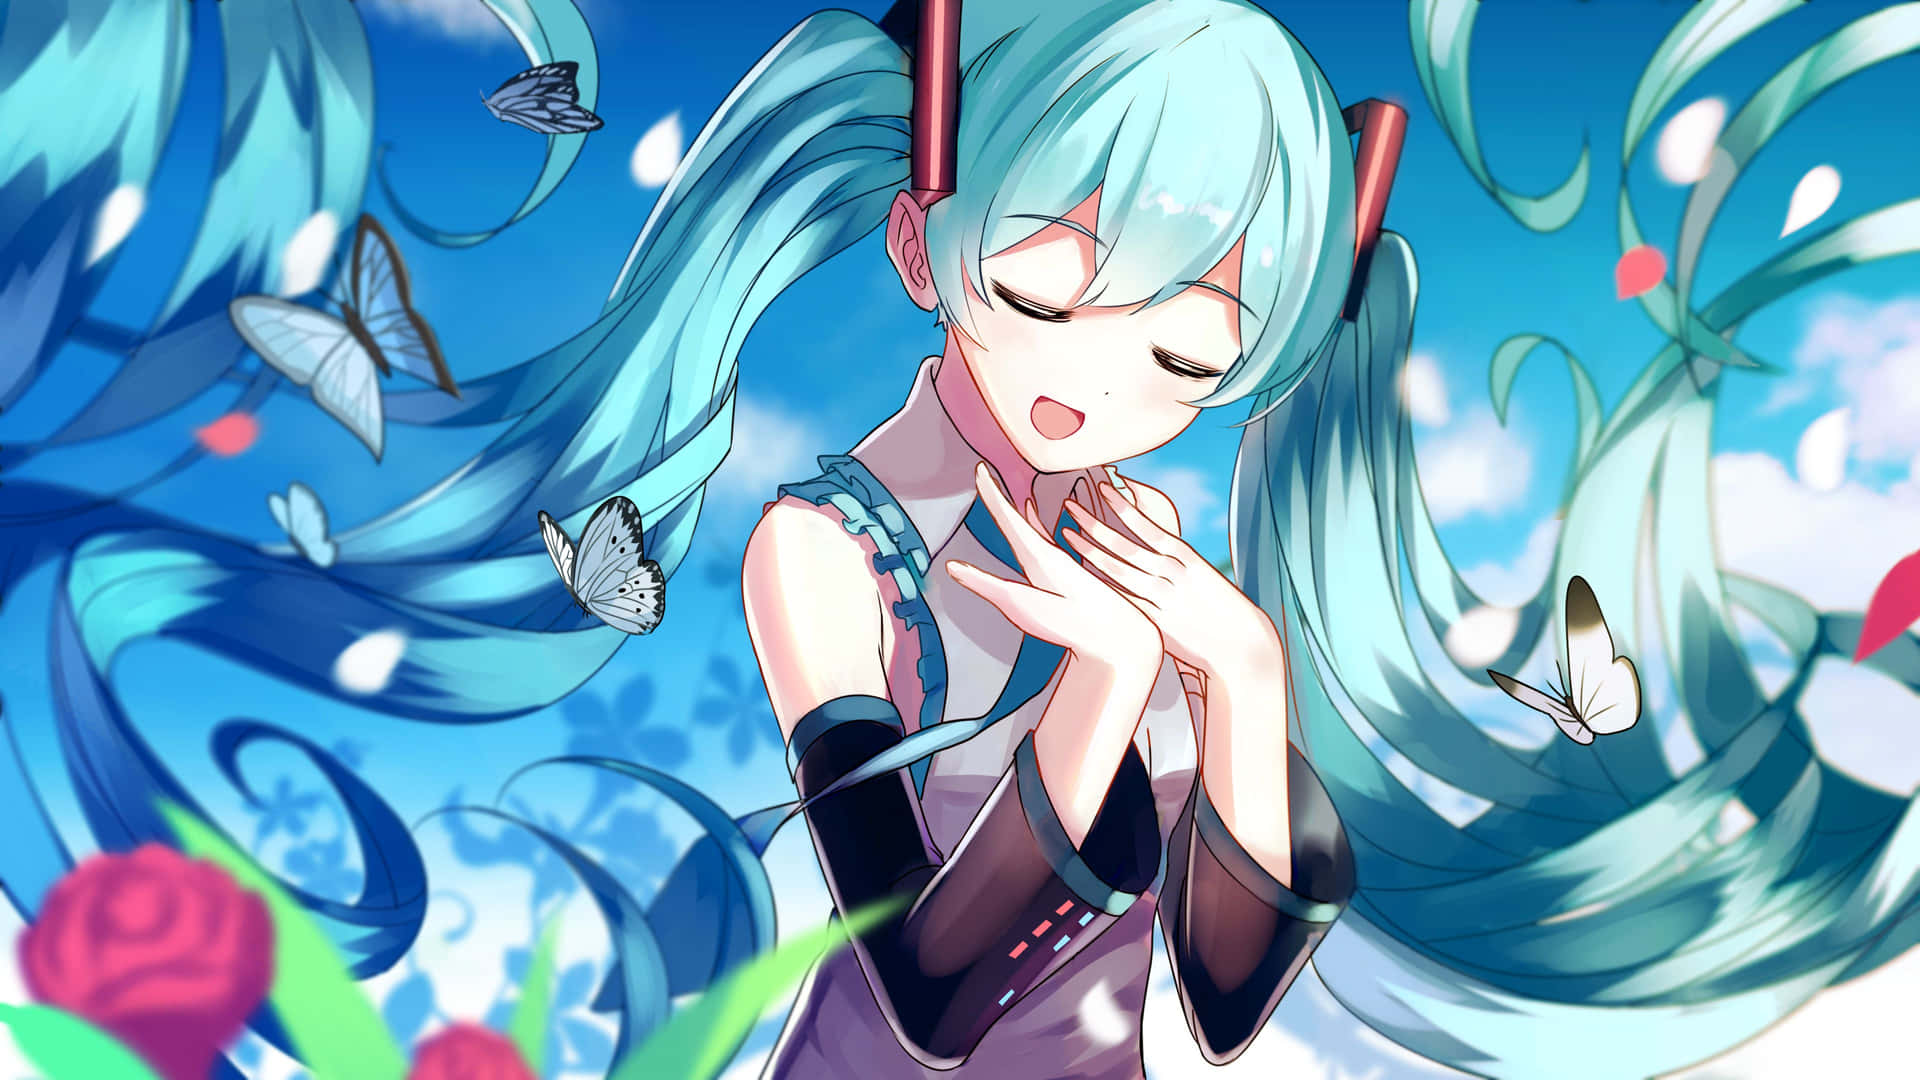 Hatsune Miku Performs for Fans